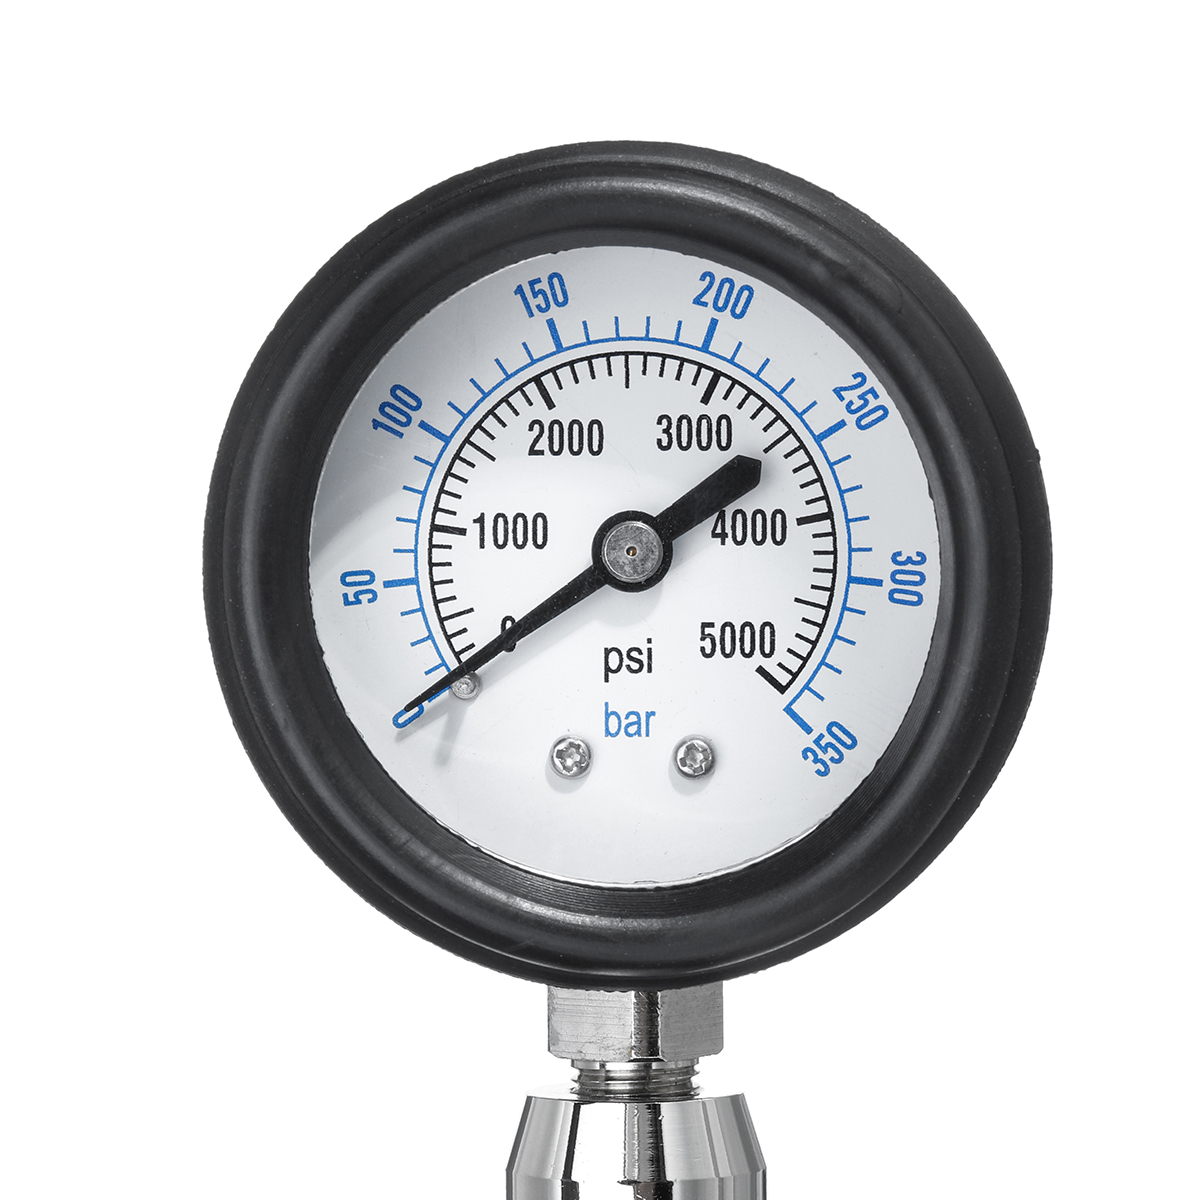 350-BAR-Axial-Hydraulic-Pressure-Gauge-Test-40MPa-6000PSI-Stainless-Steel-Indicator-1649890-5